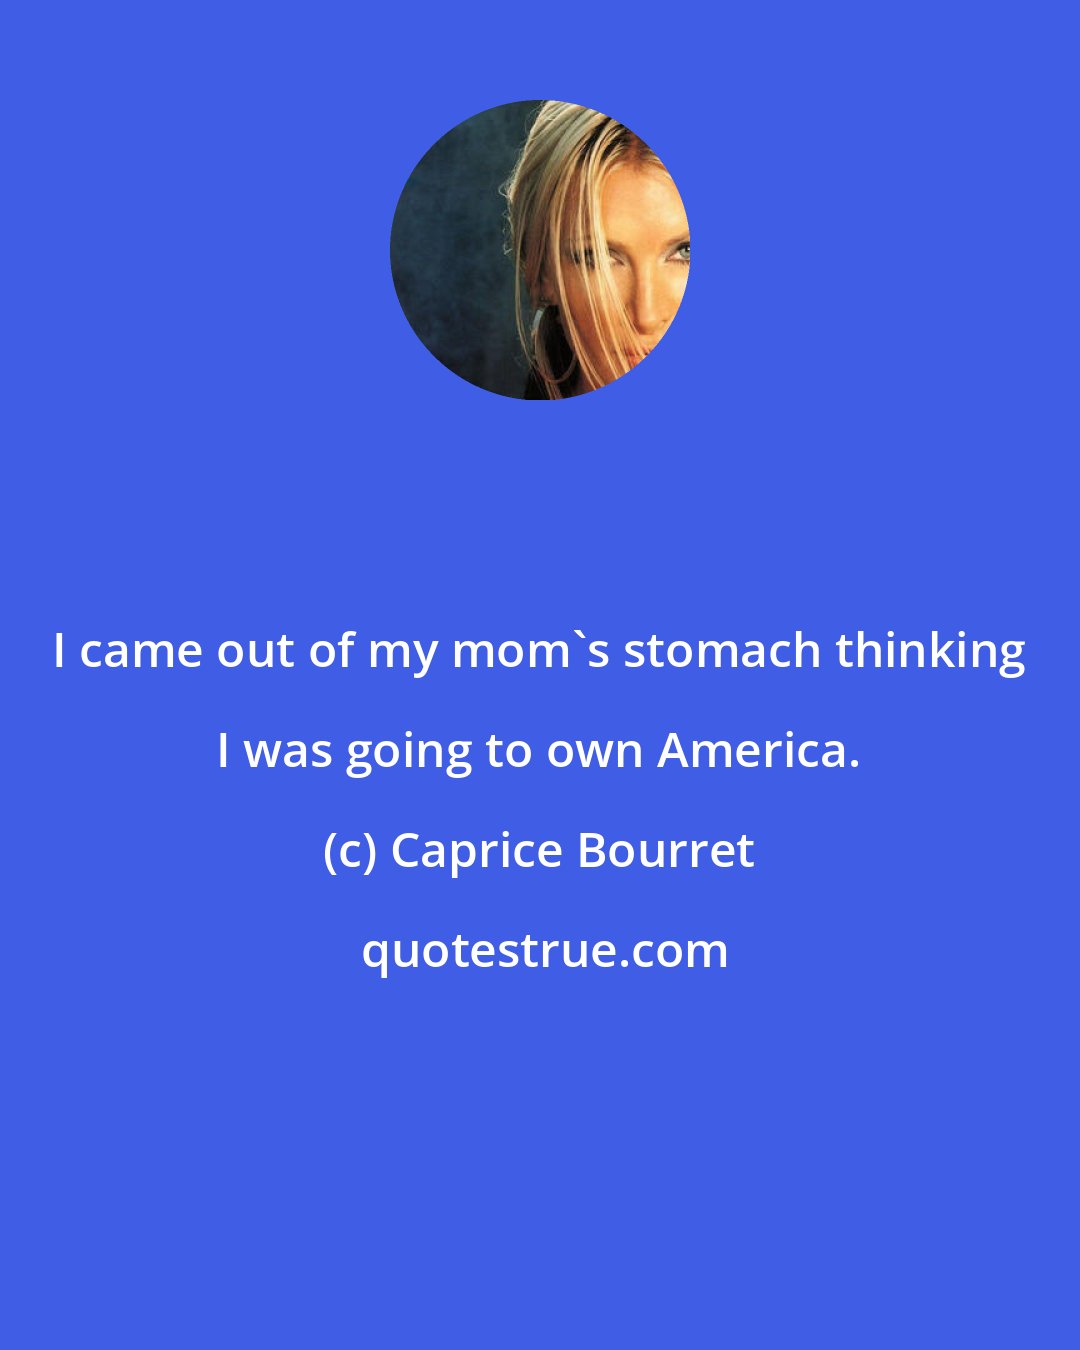 Caprice Bourret: I came out of my mom's stomach thinking I was going to own America.